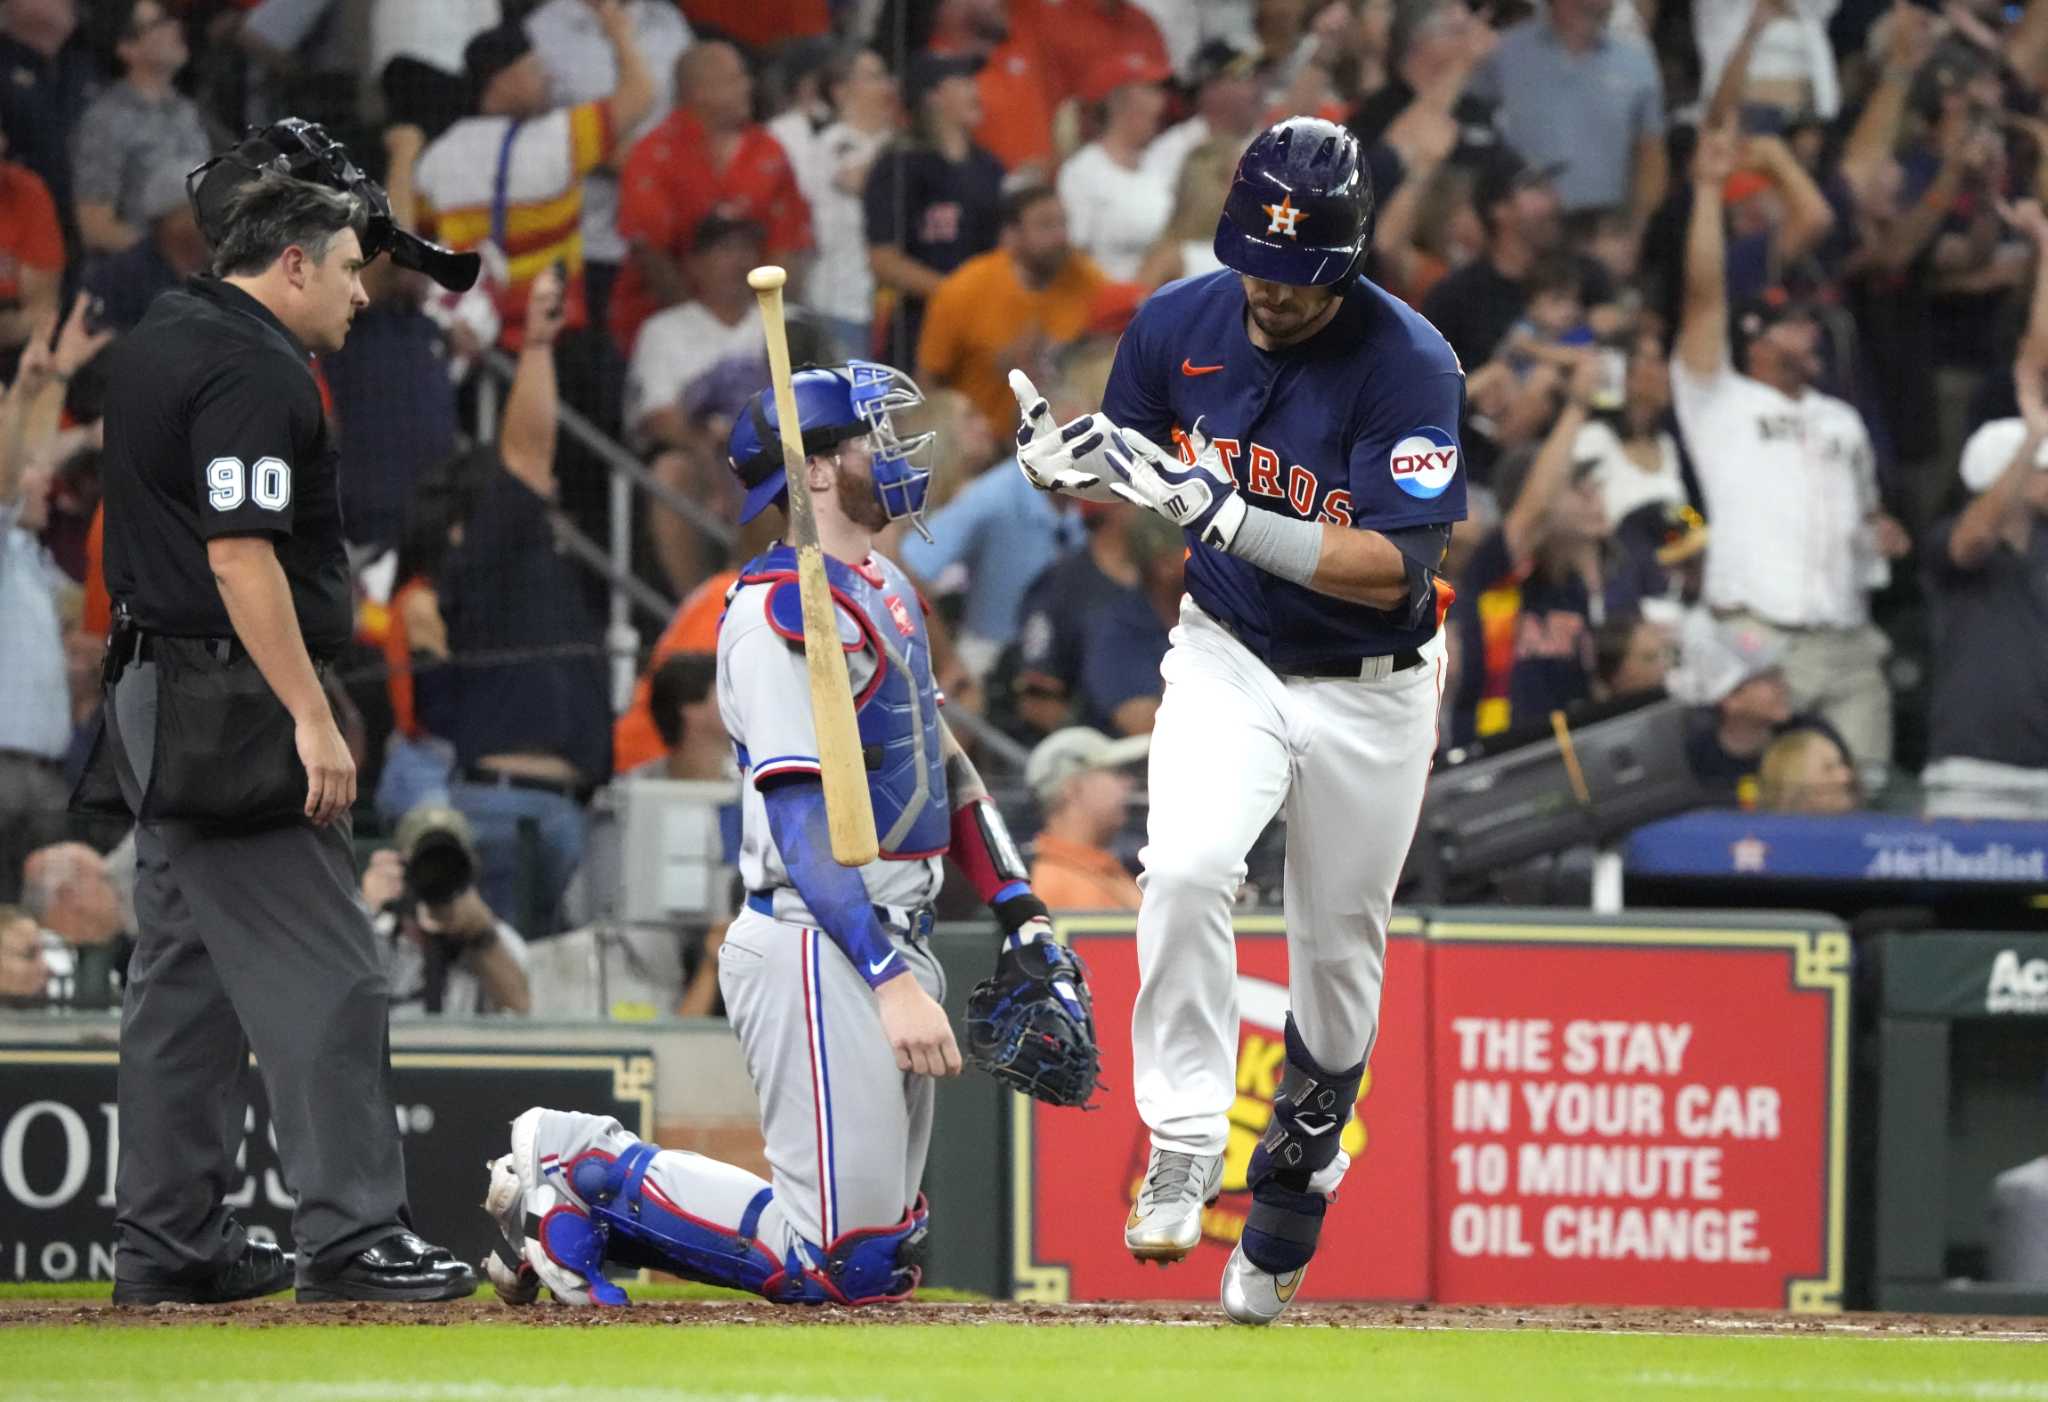 Astros lose finale vs. Rangers after benches clear